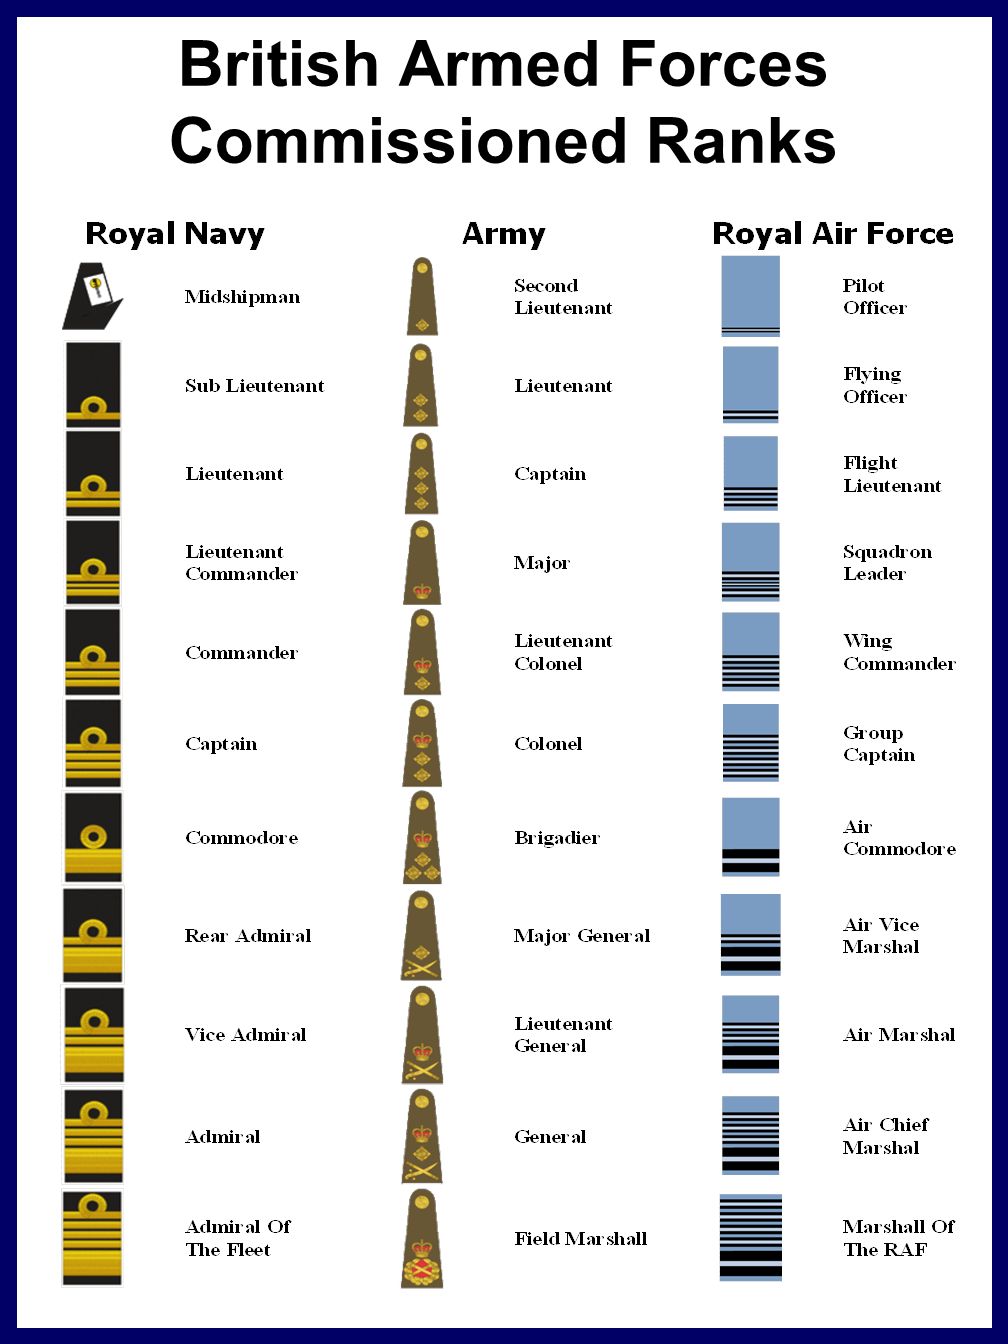 British+Armed+Forces+Commissioned+Ranks.jpg